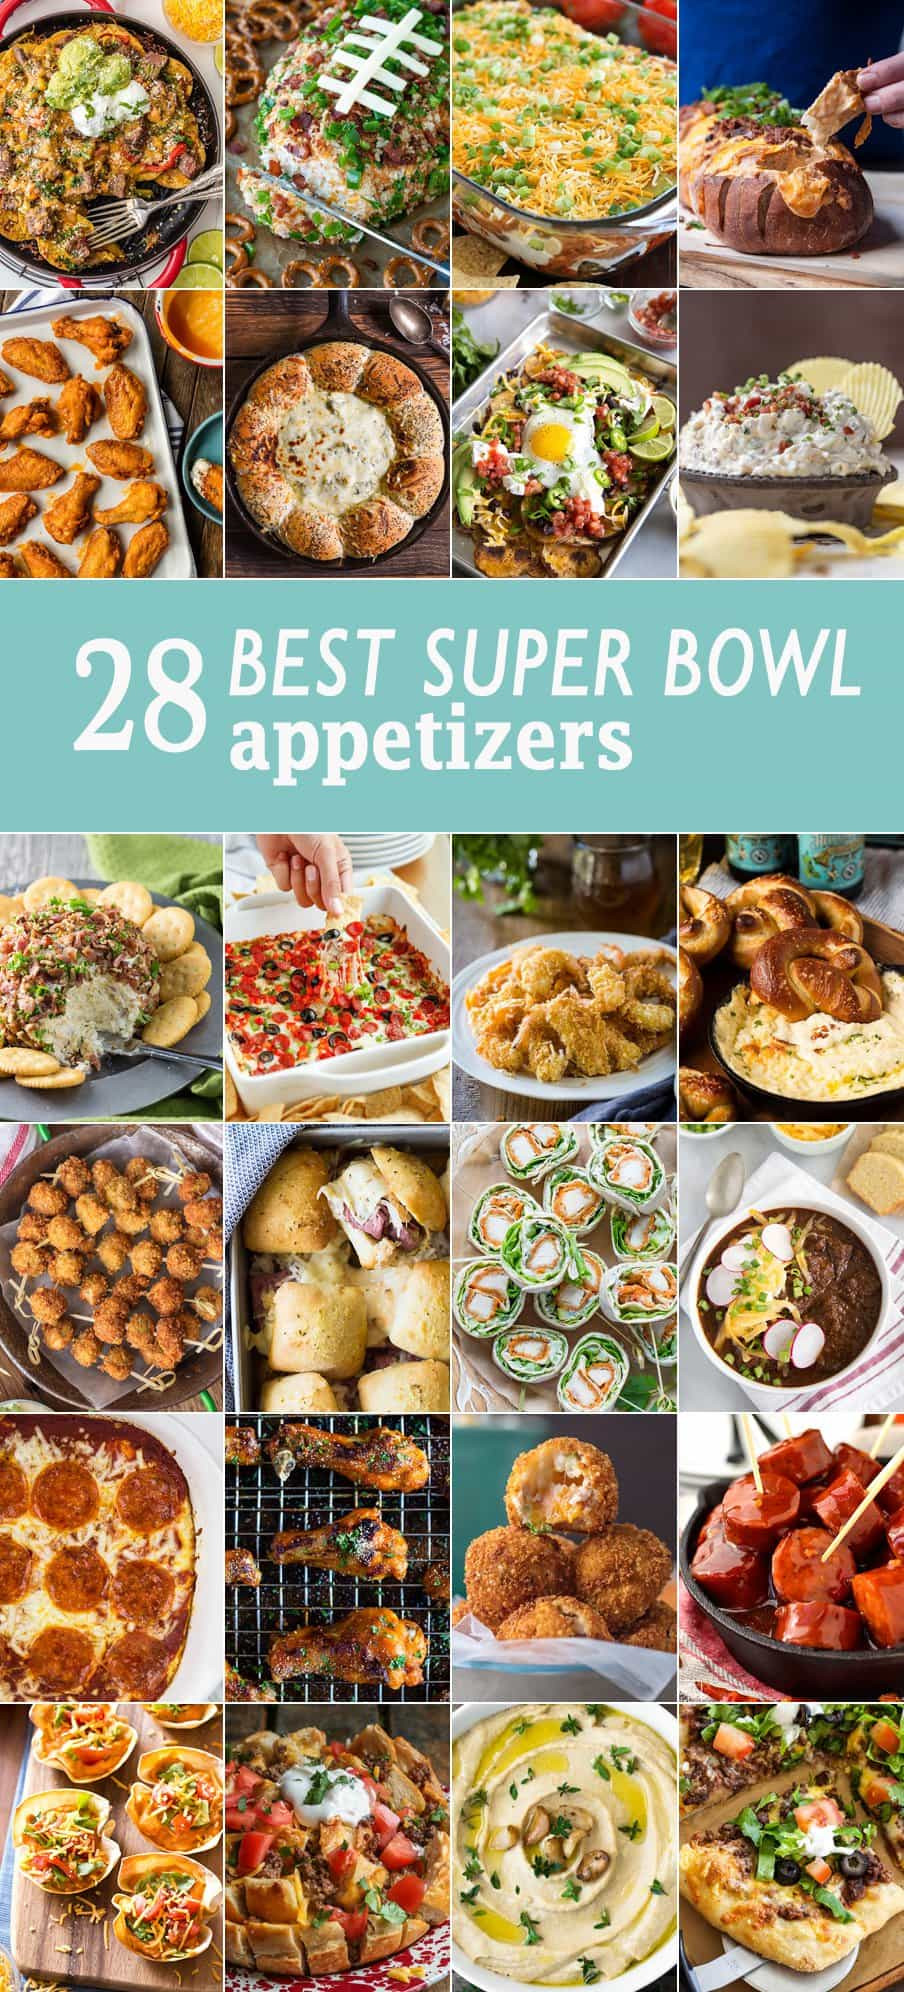 Super Bowl Appetizers Recipes
 10 Best Super Bowl Appetizers The Cookie Rookie